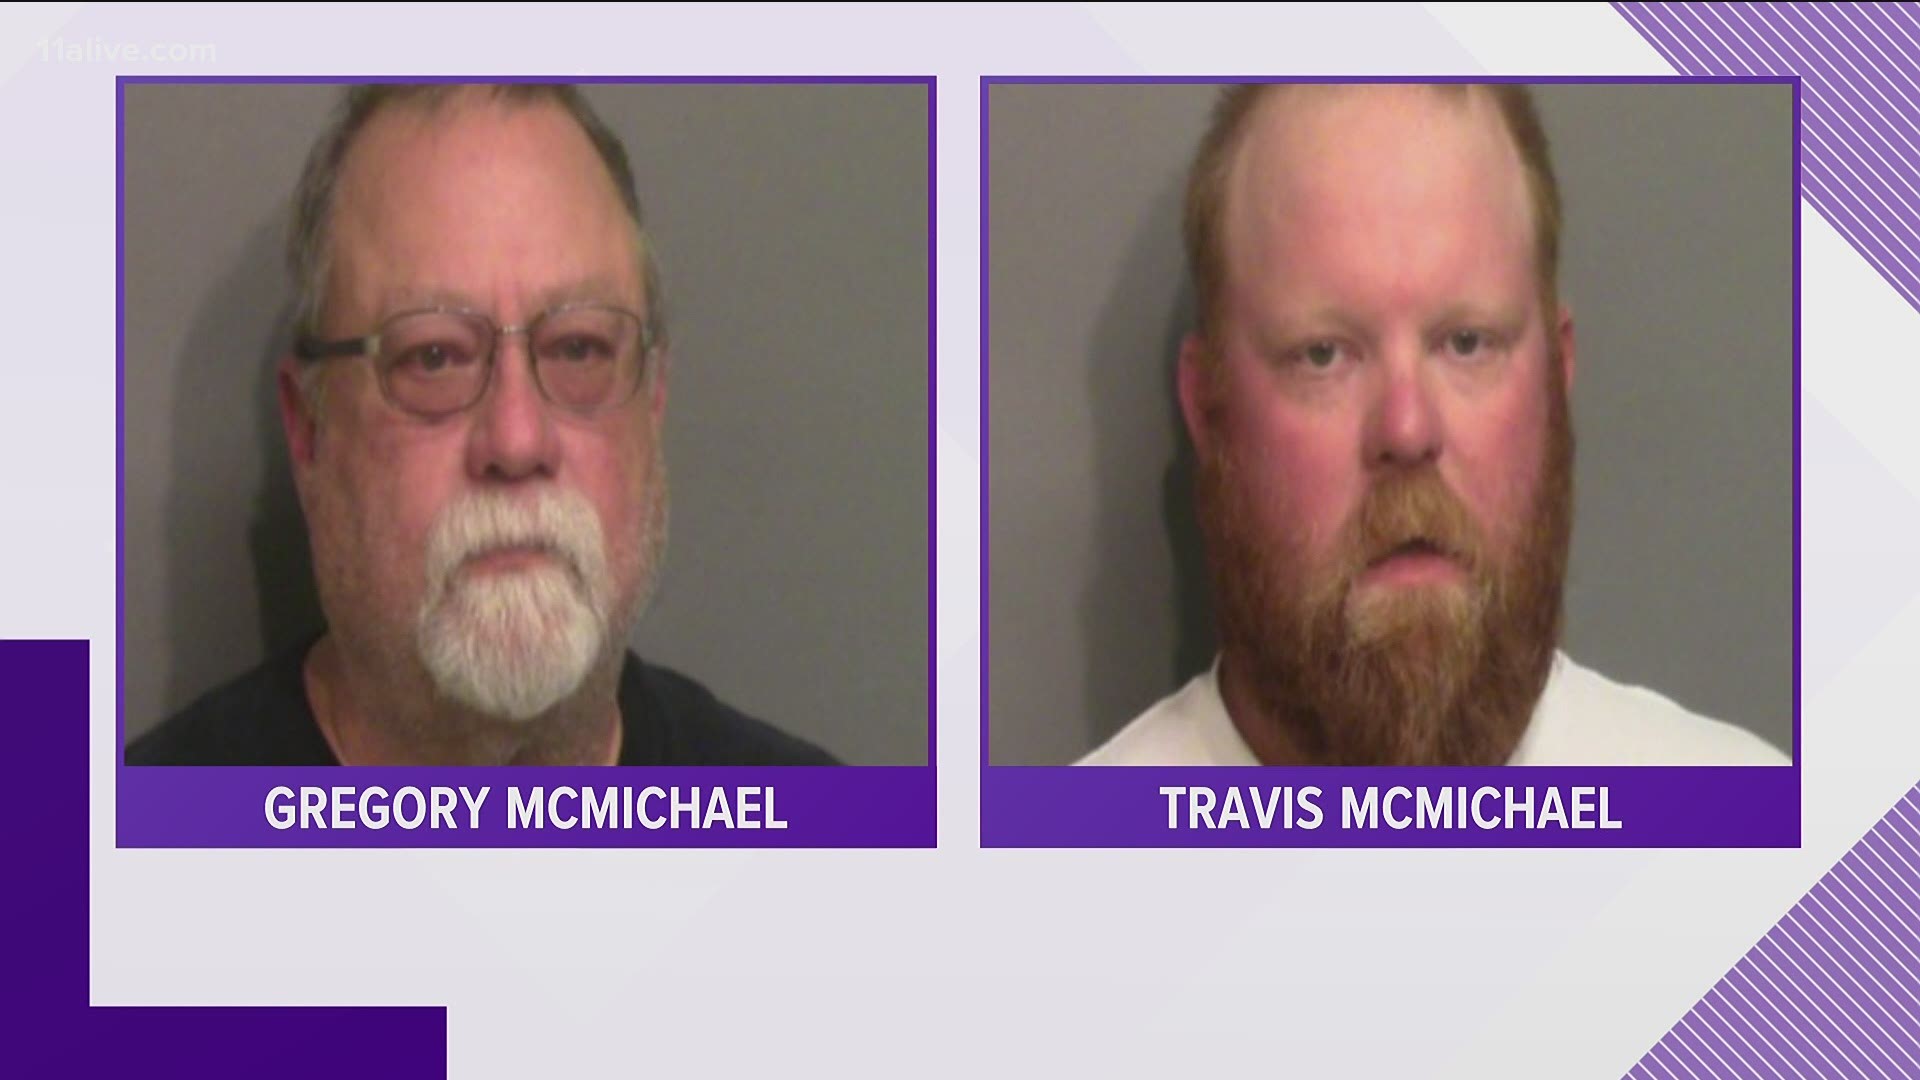 Racist messages were read in court Thursday as a judge weighs whether to grant bond for a white father and son accused of killing a Black man in Georgia.